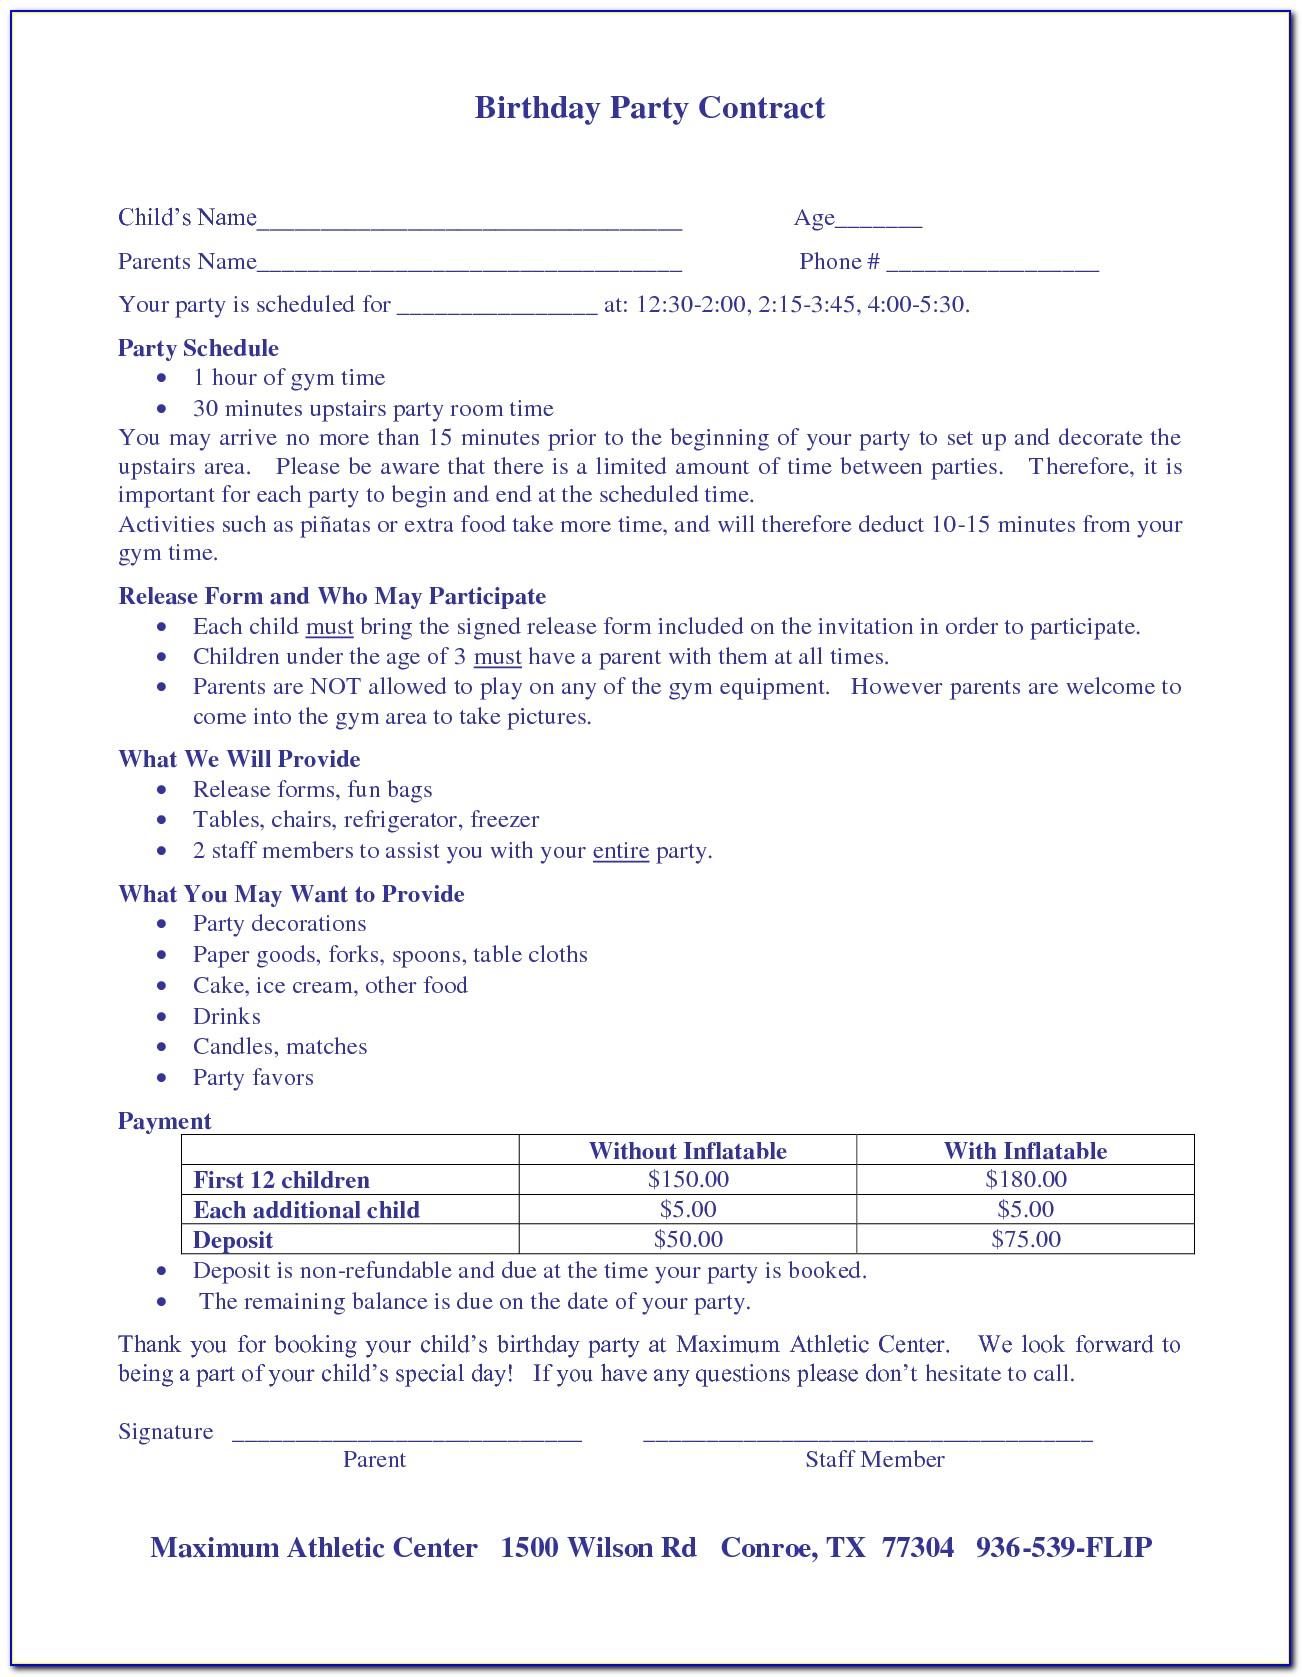 Birthday Party Contract Template